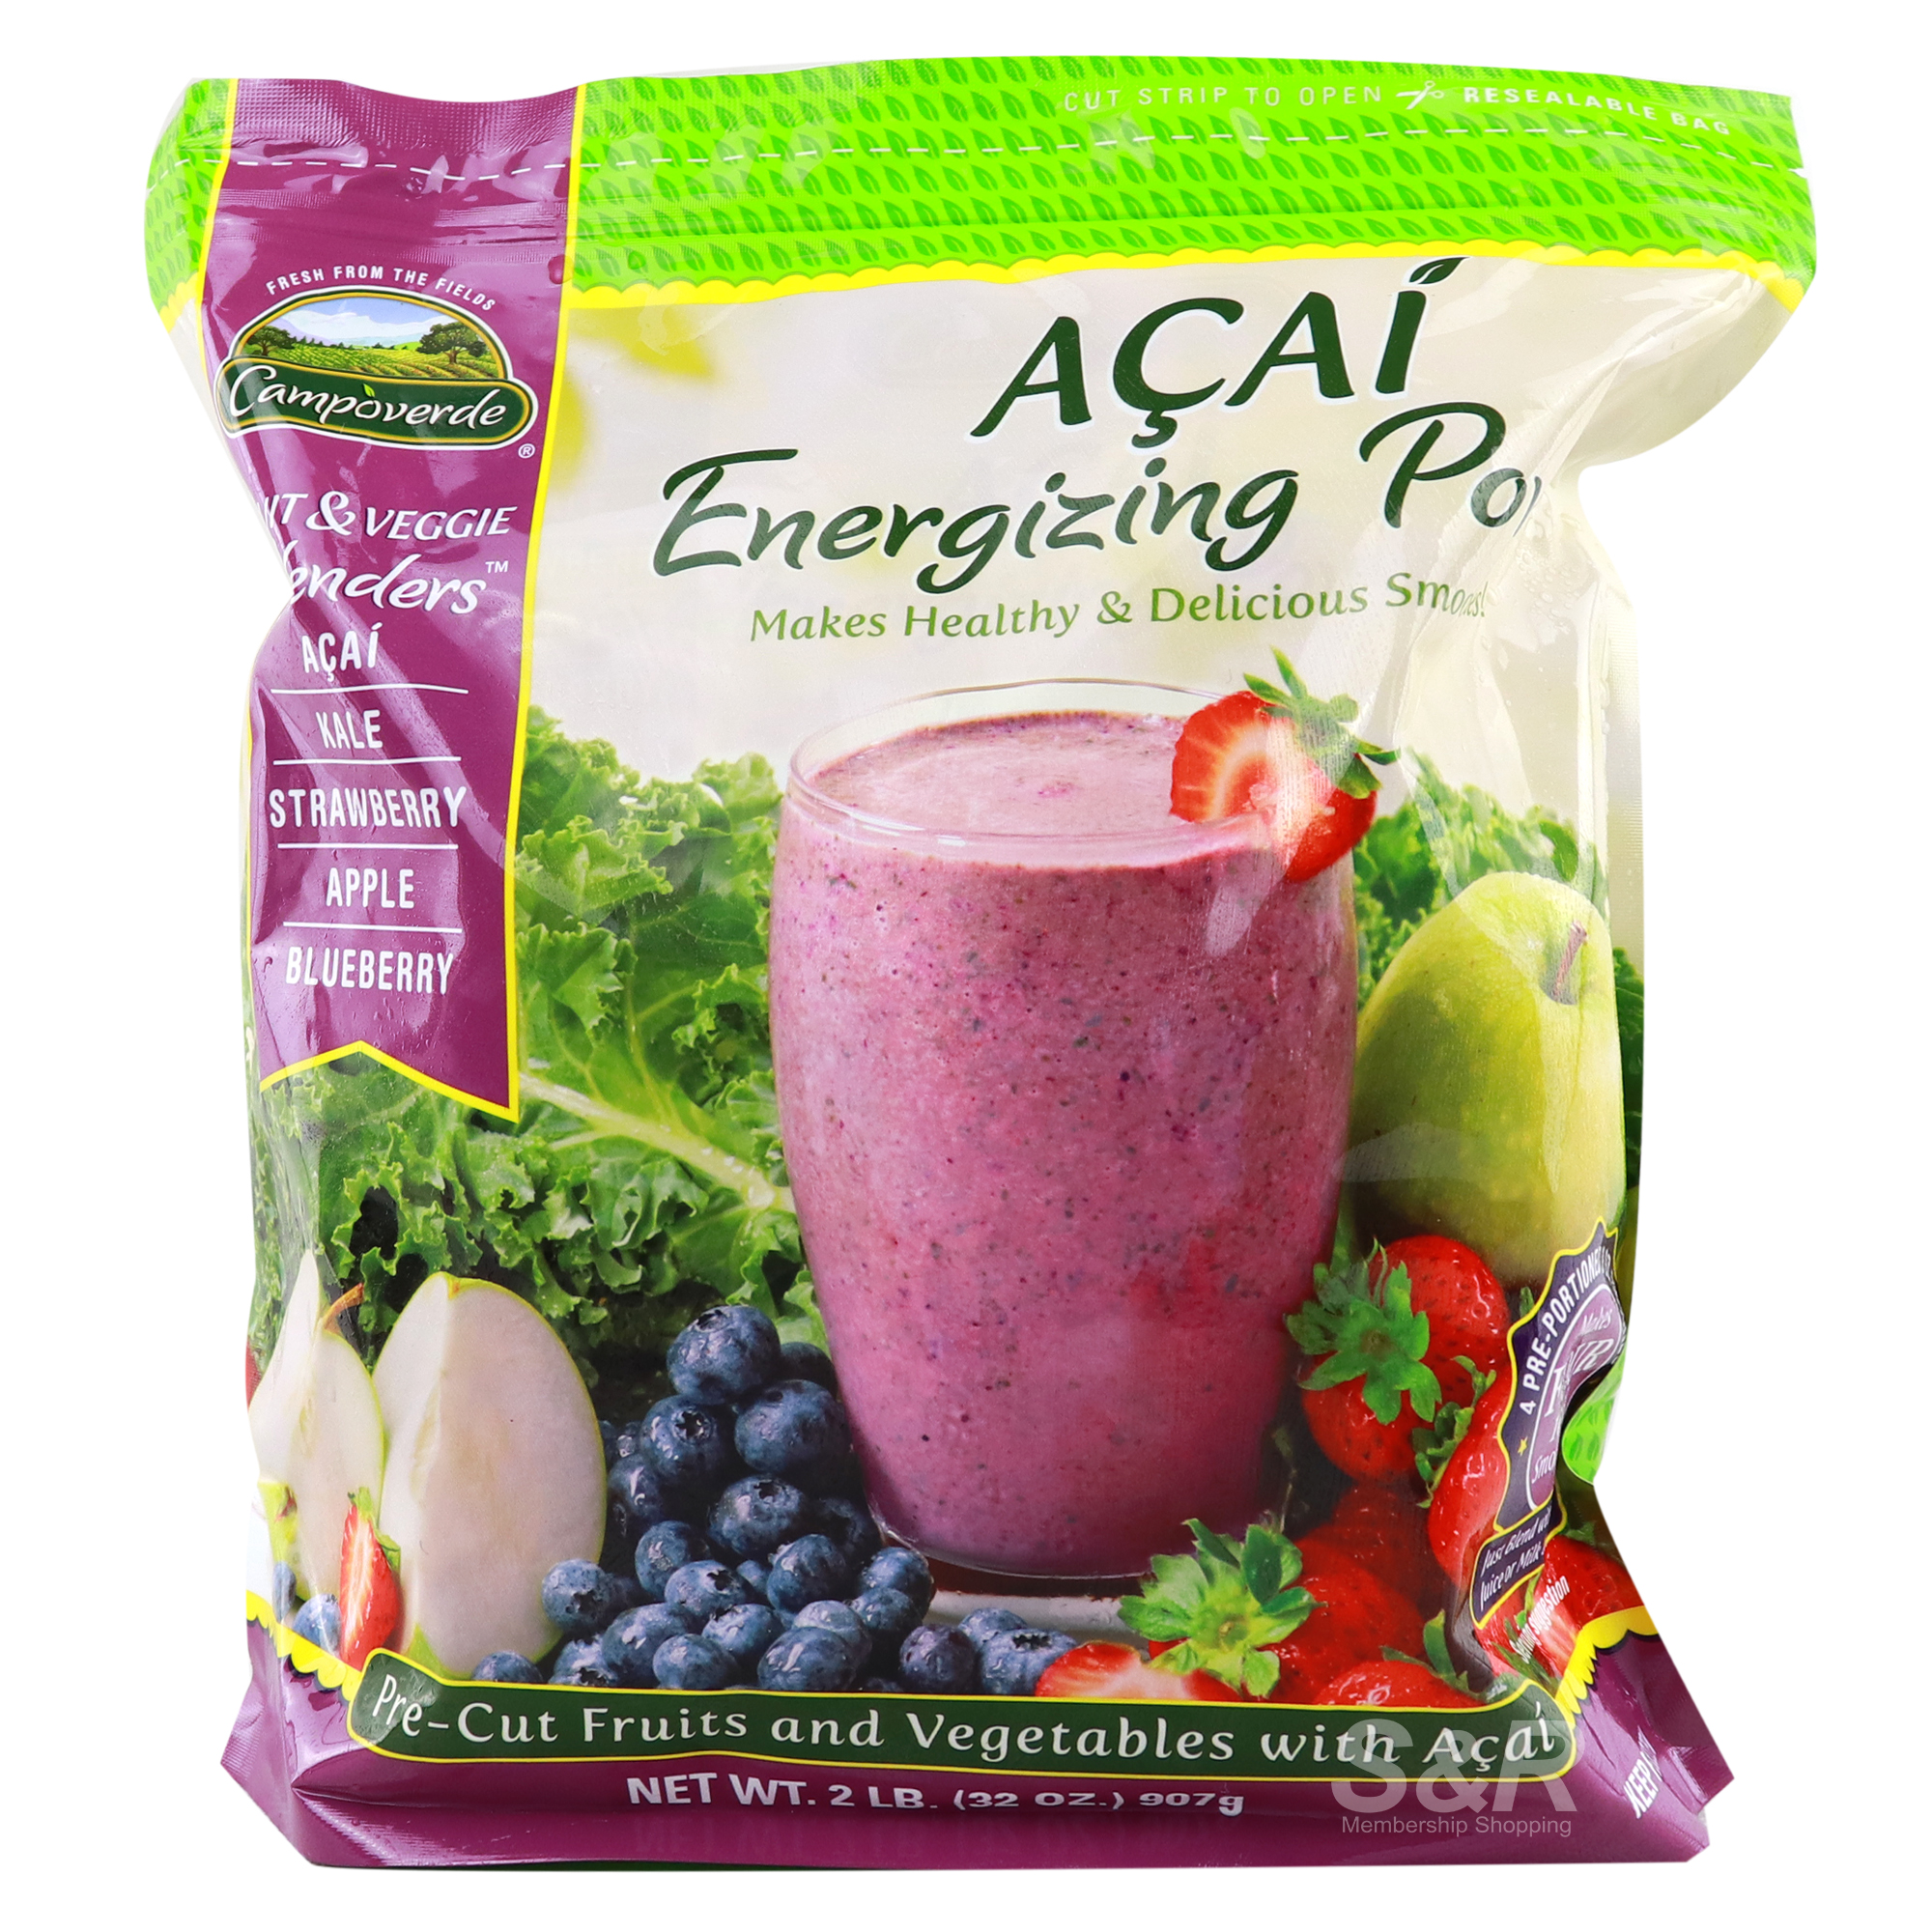 Campoverde Acai Energizing Power Pre-Cut Fruits and Vegetables with Acai 907g